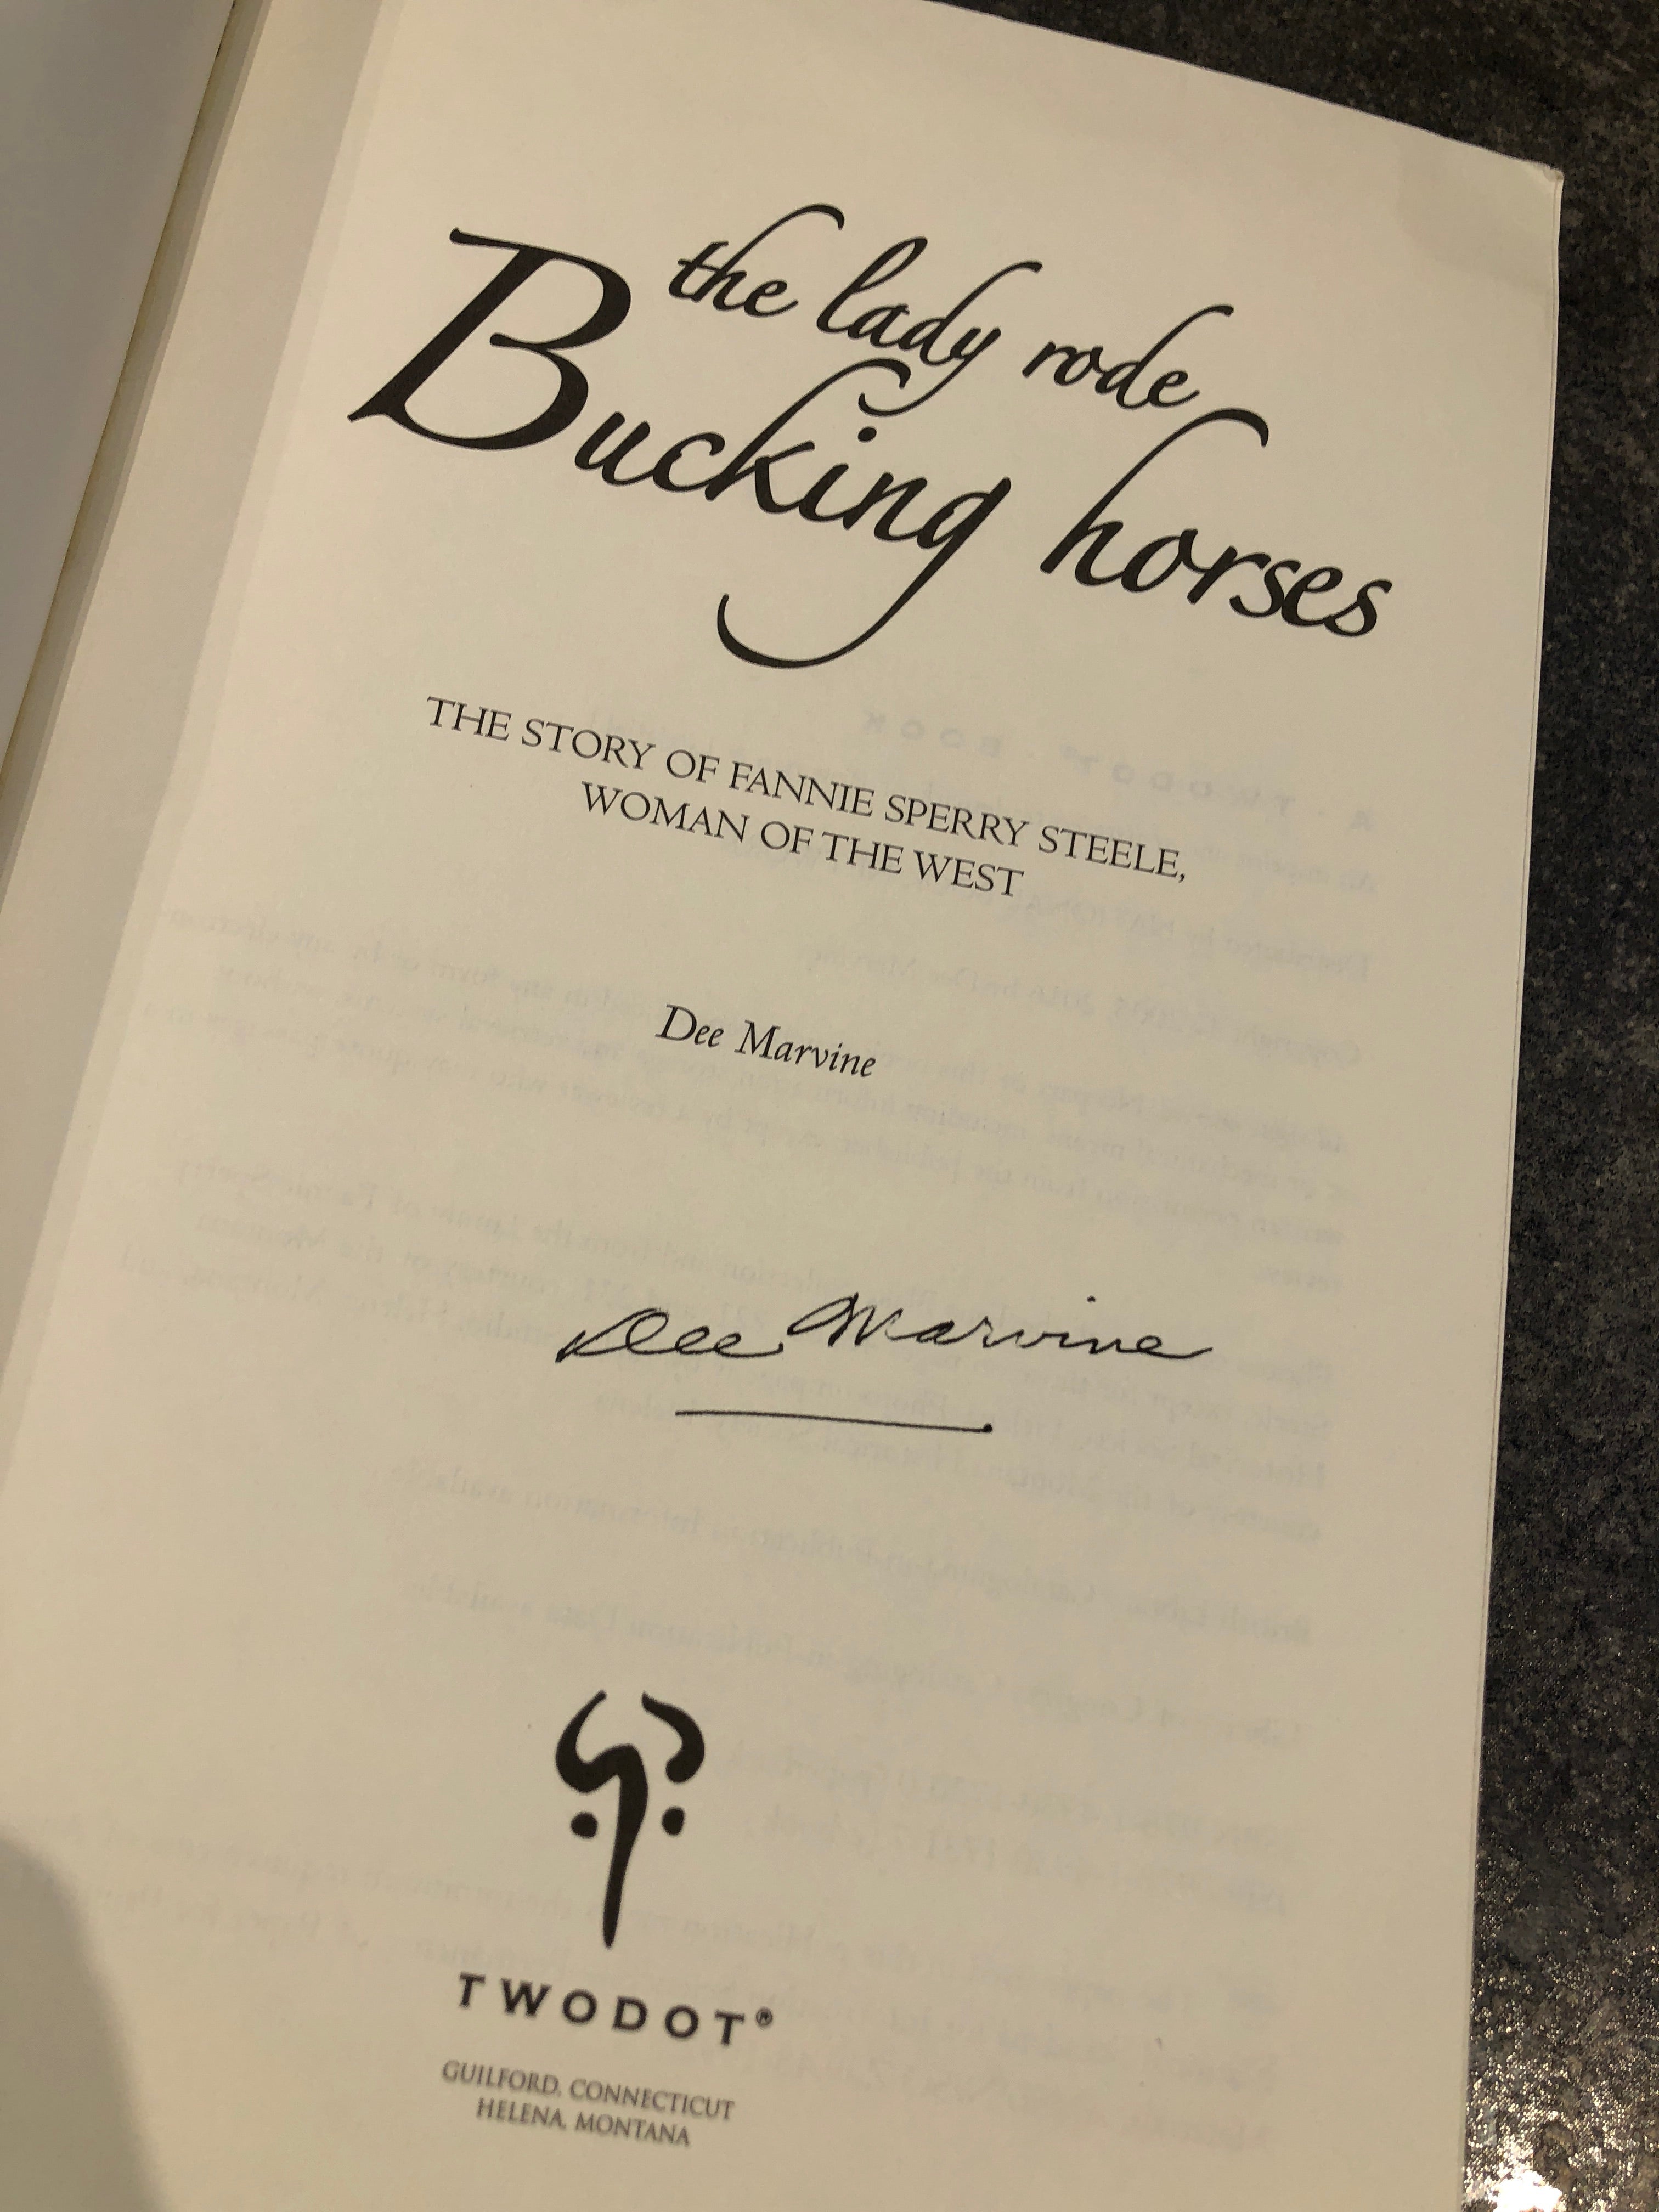 Autographed Book: The Lady Rode Bucking Horses by Dee Marvine